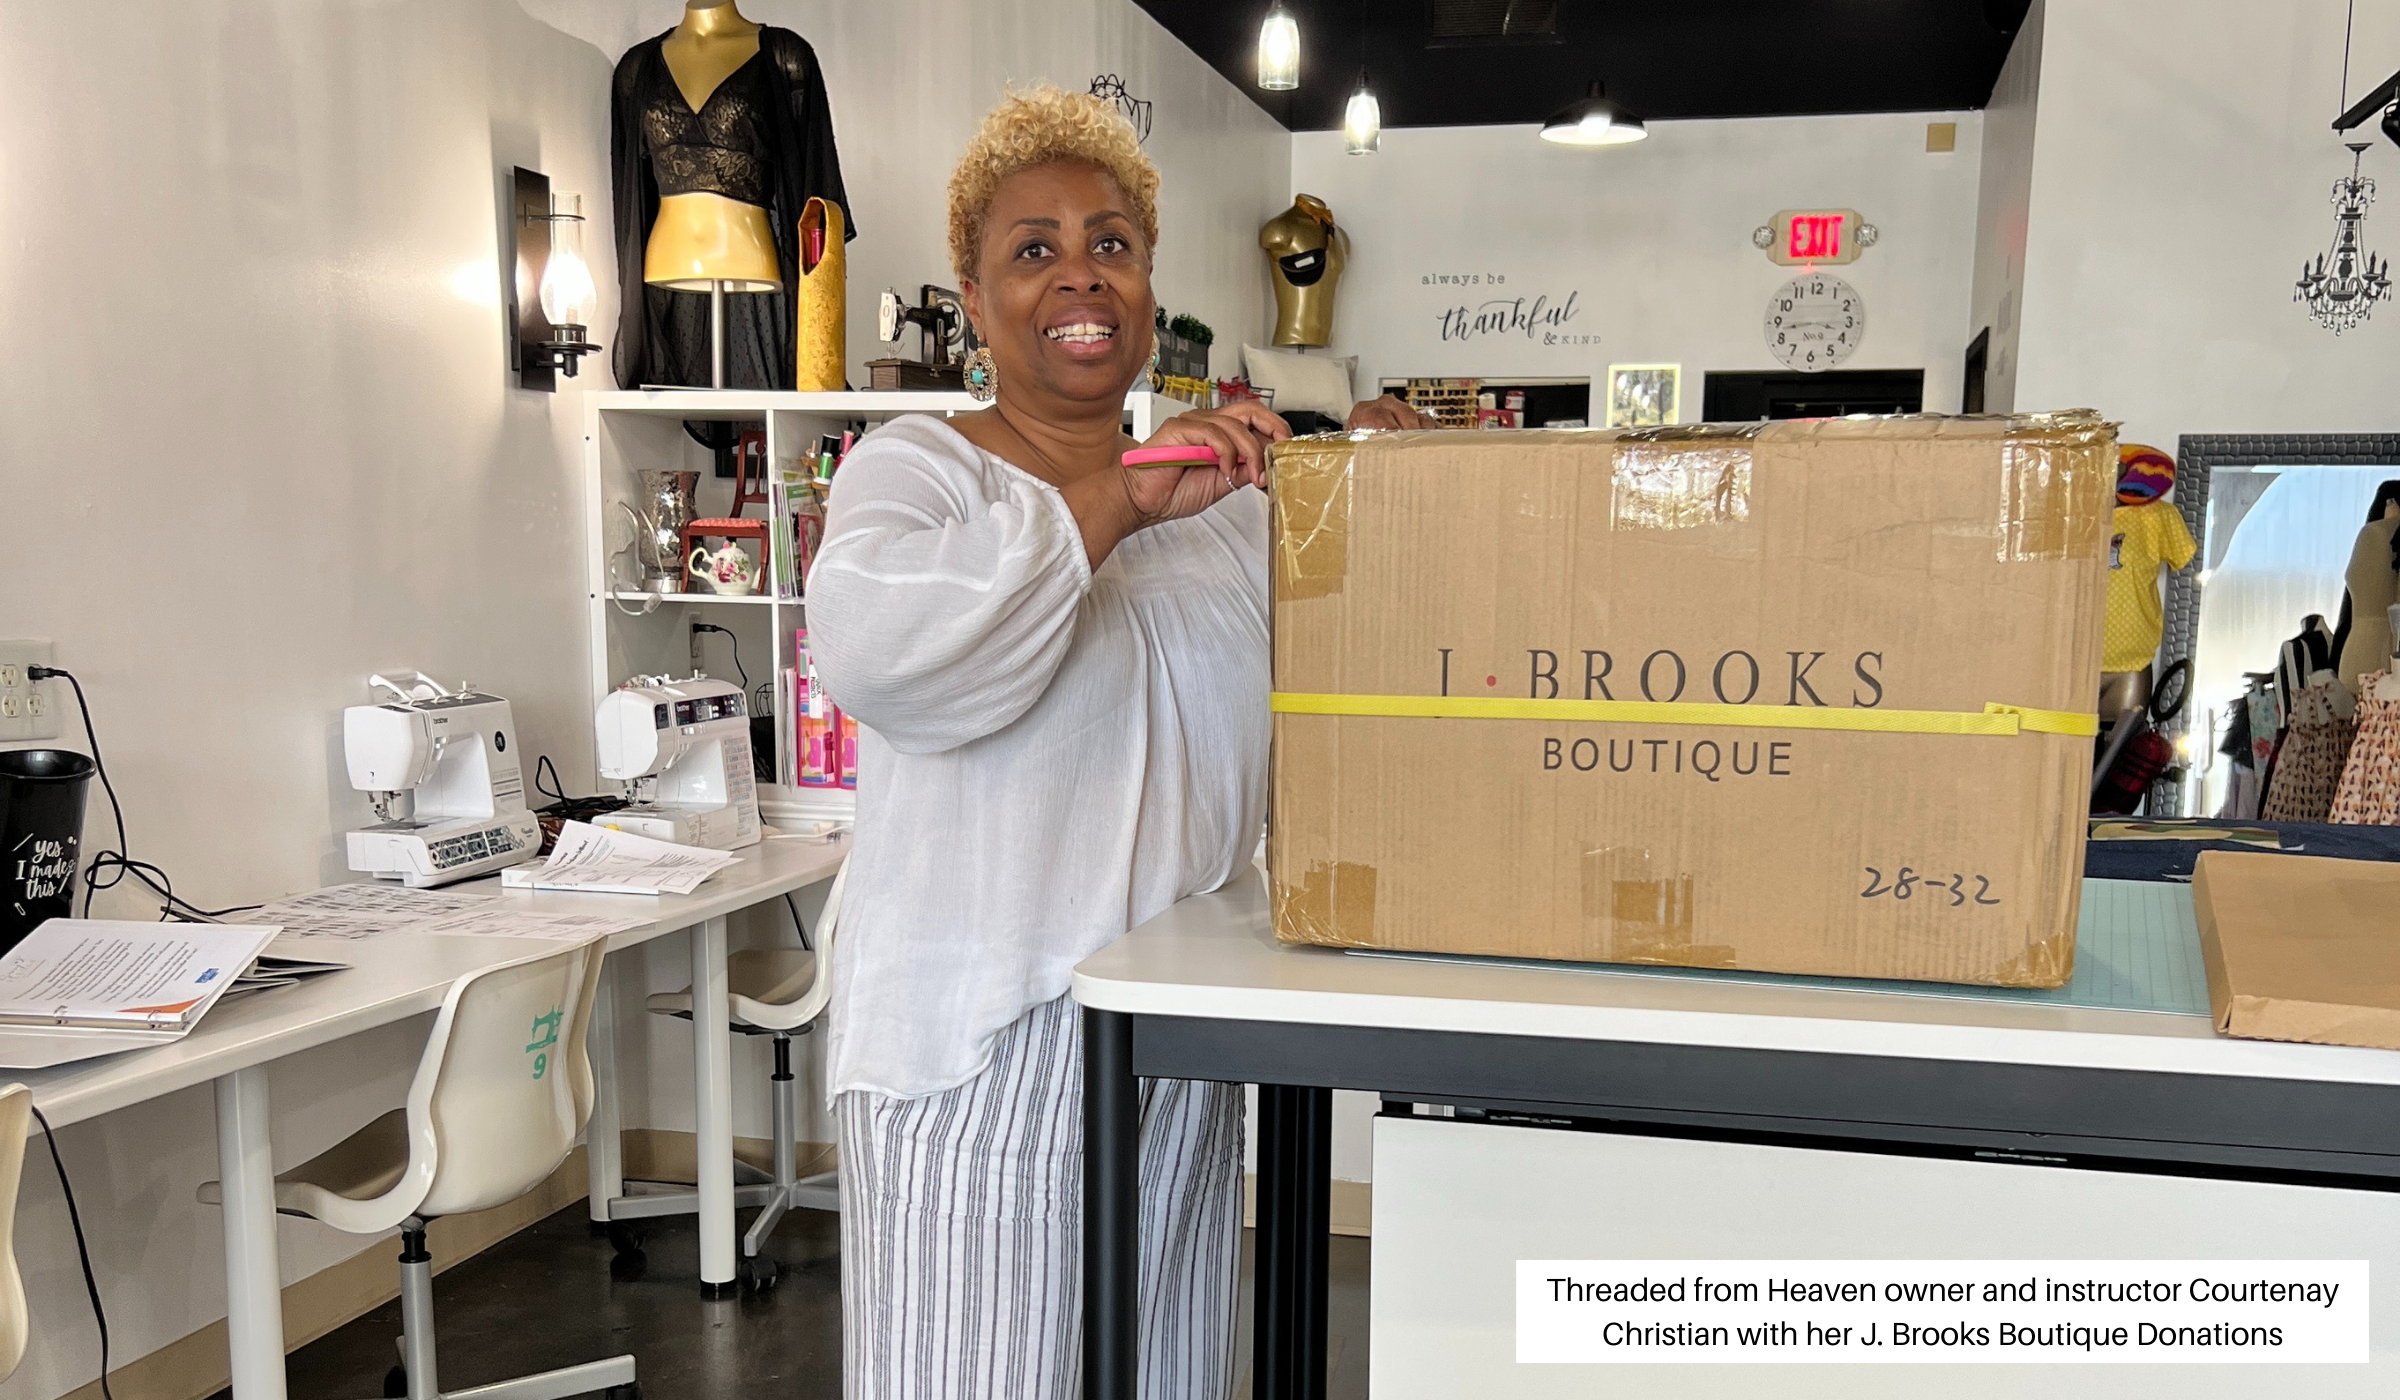 Owner and instructor Courtenay Christian opening her J. Brooks Boutique Donations